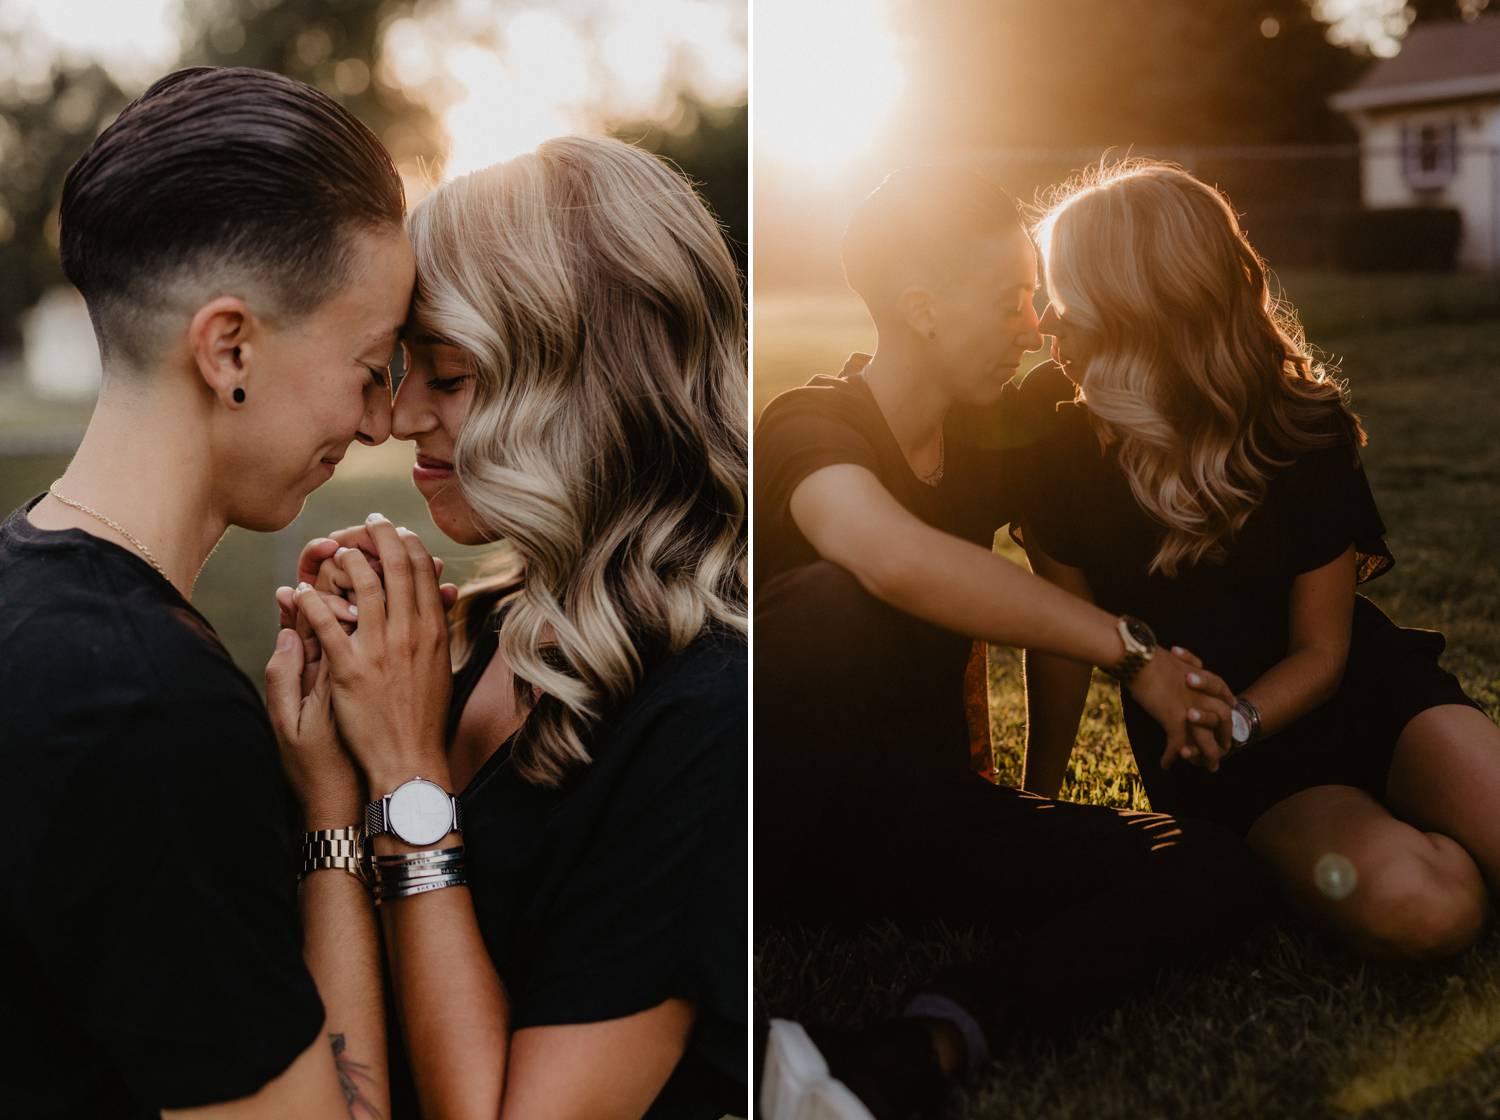 A queer couples stands forehead to forehead as the sun sets behind them